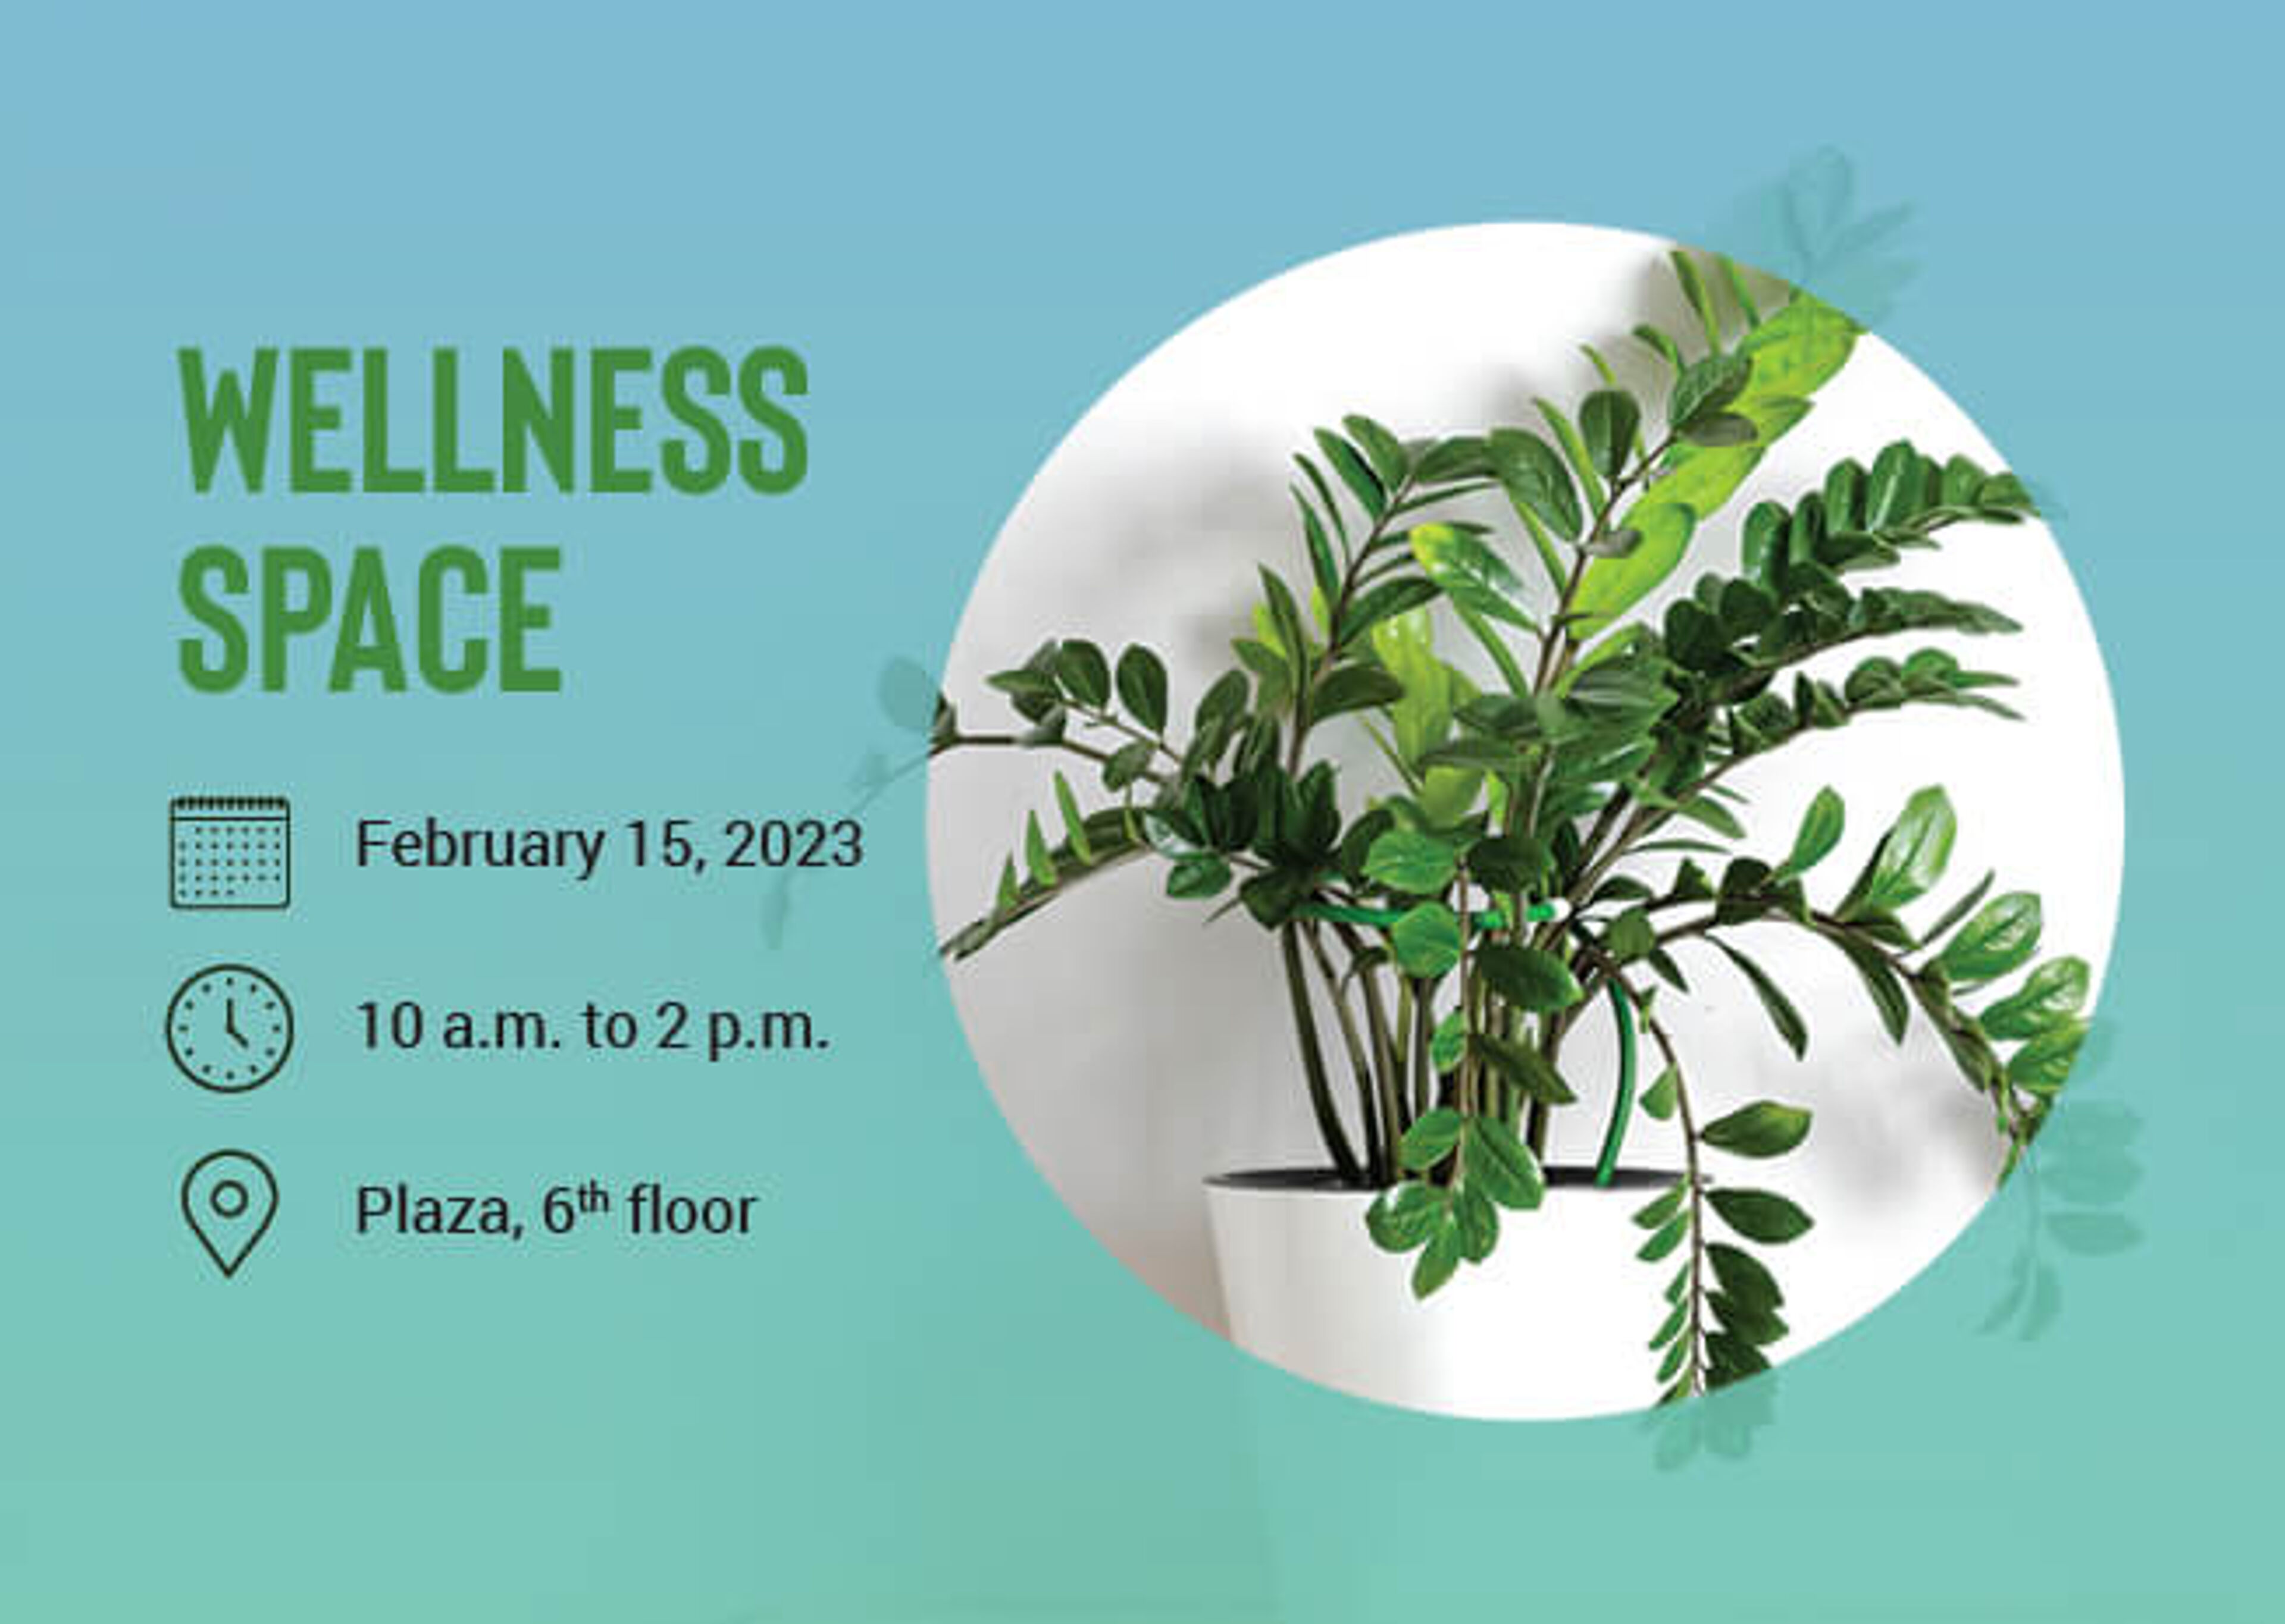 Invitation to a wellness space event on February 15, 2023, from 10 a.m. to 2 p.m., highlighting a potted green plant.

